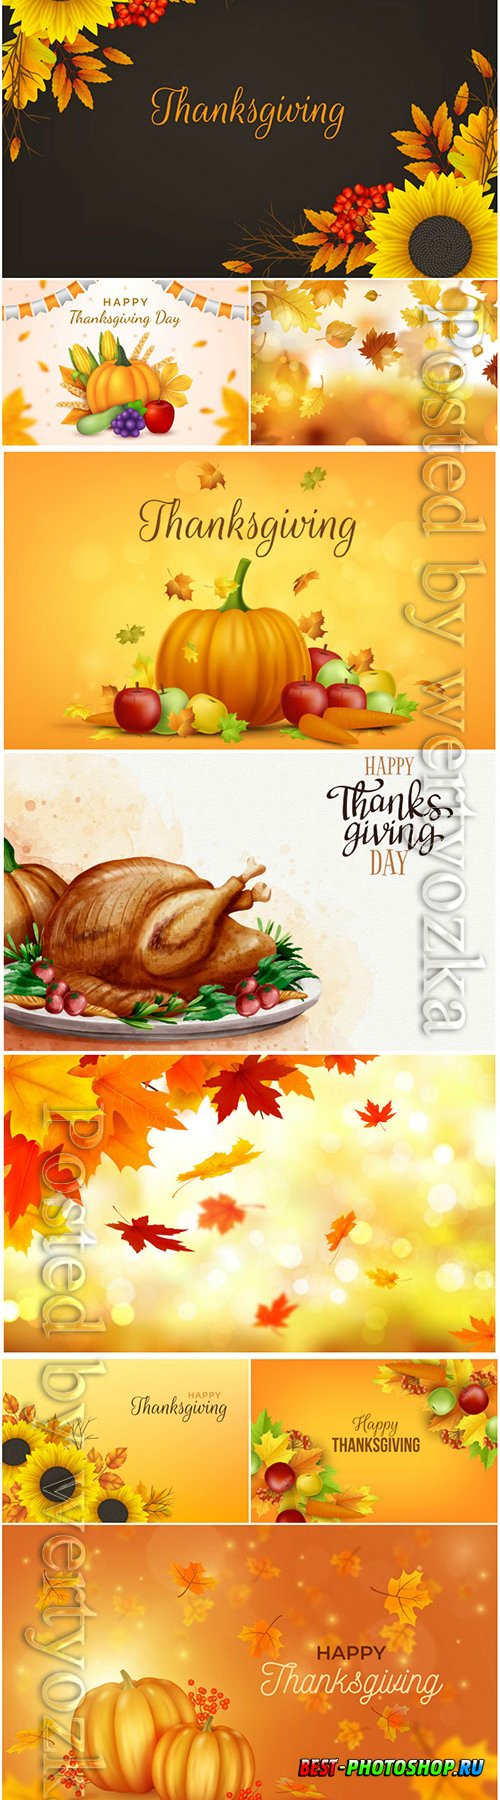 Realistic thanksgiving background